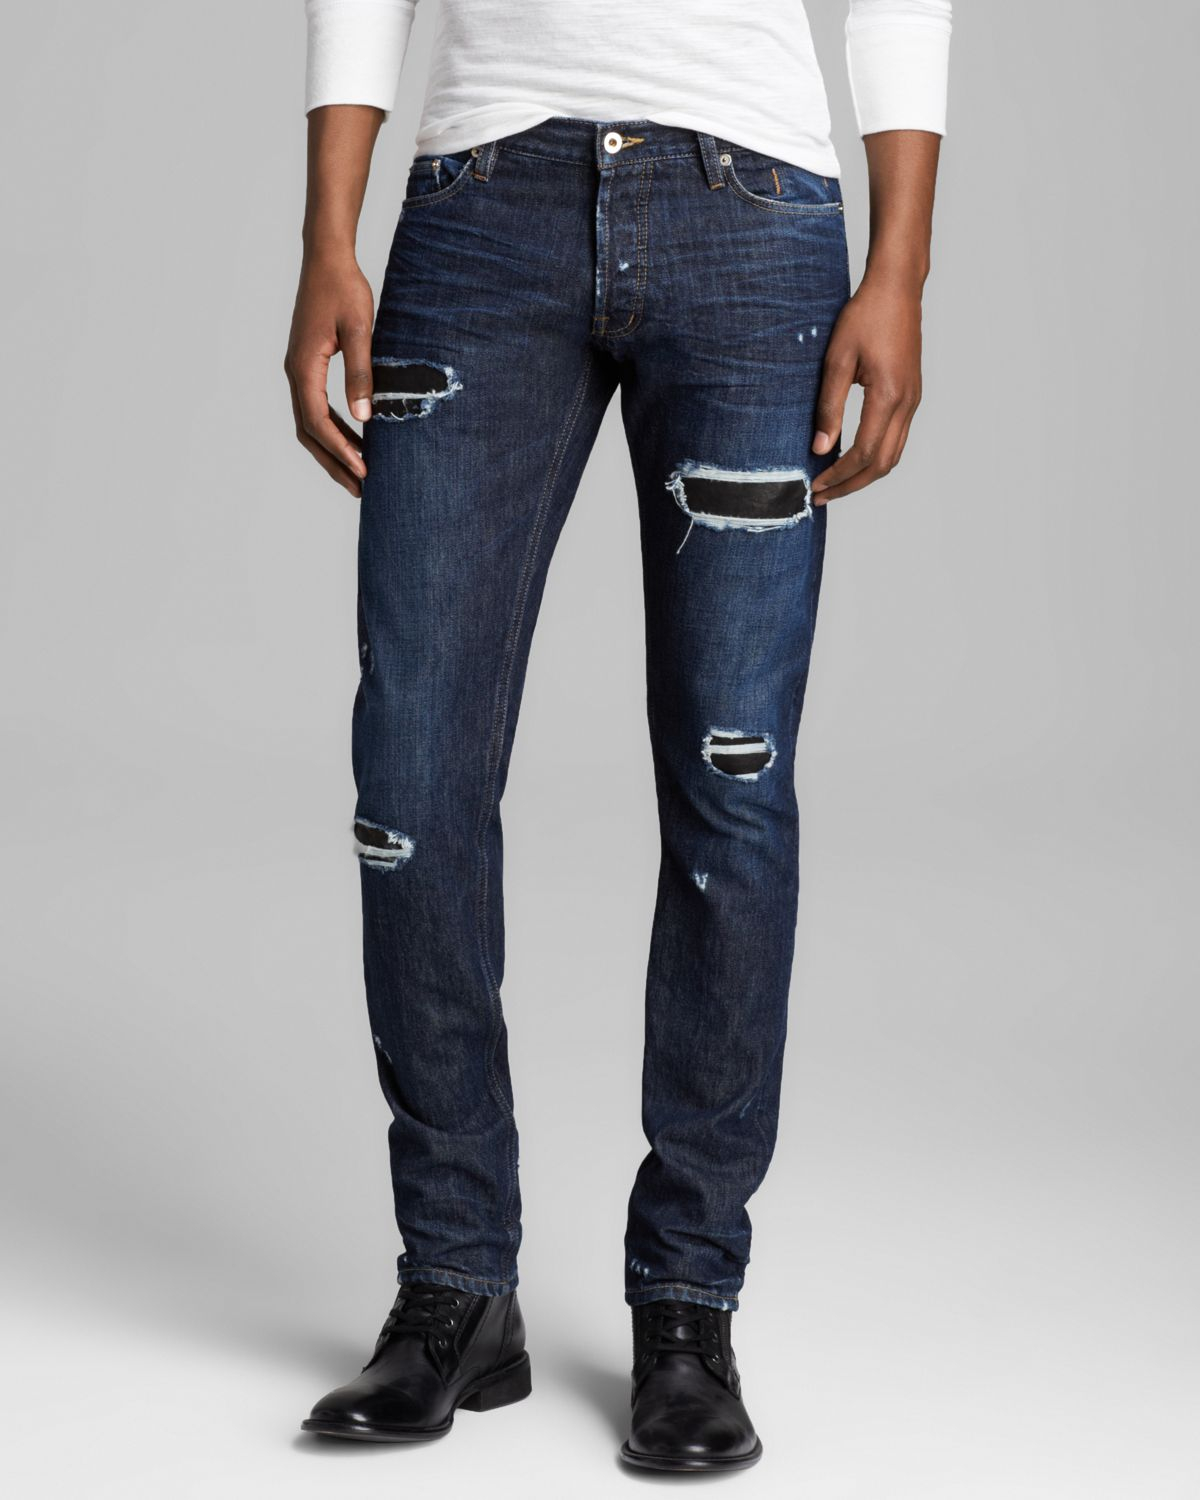 Lyst - Public school Jeans Torn and Patched Slim Fit in Indigo in Blue ...